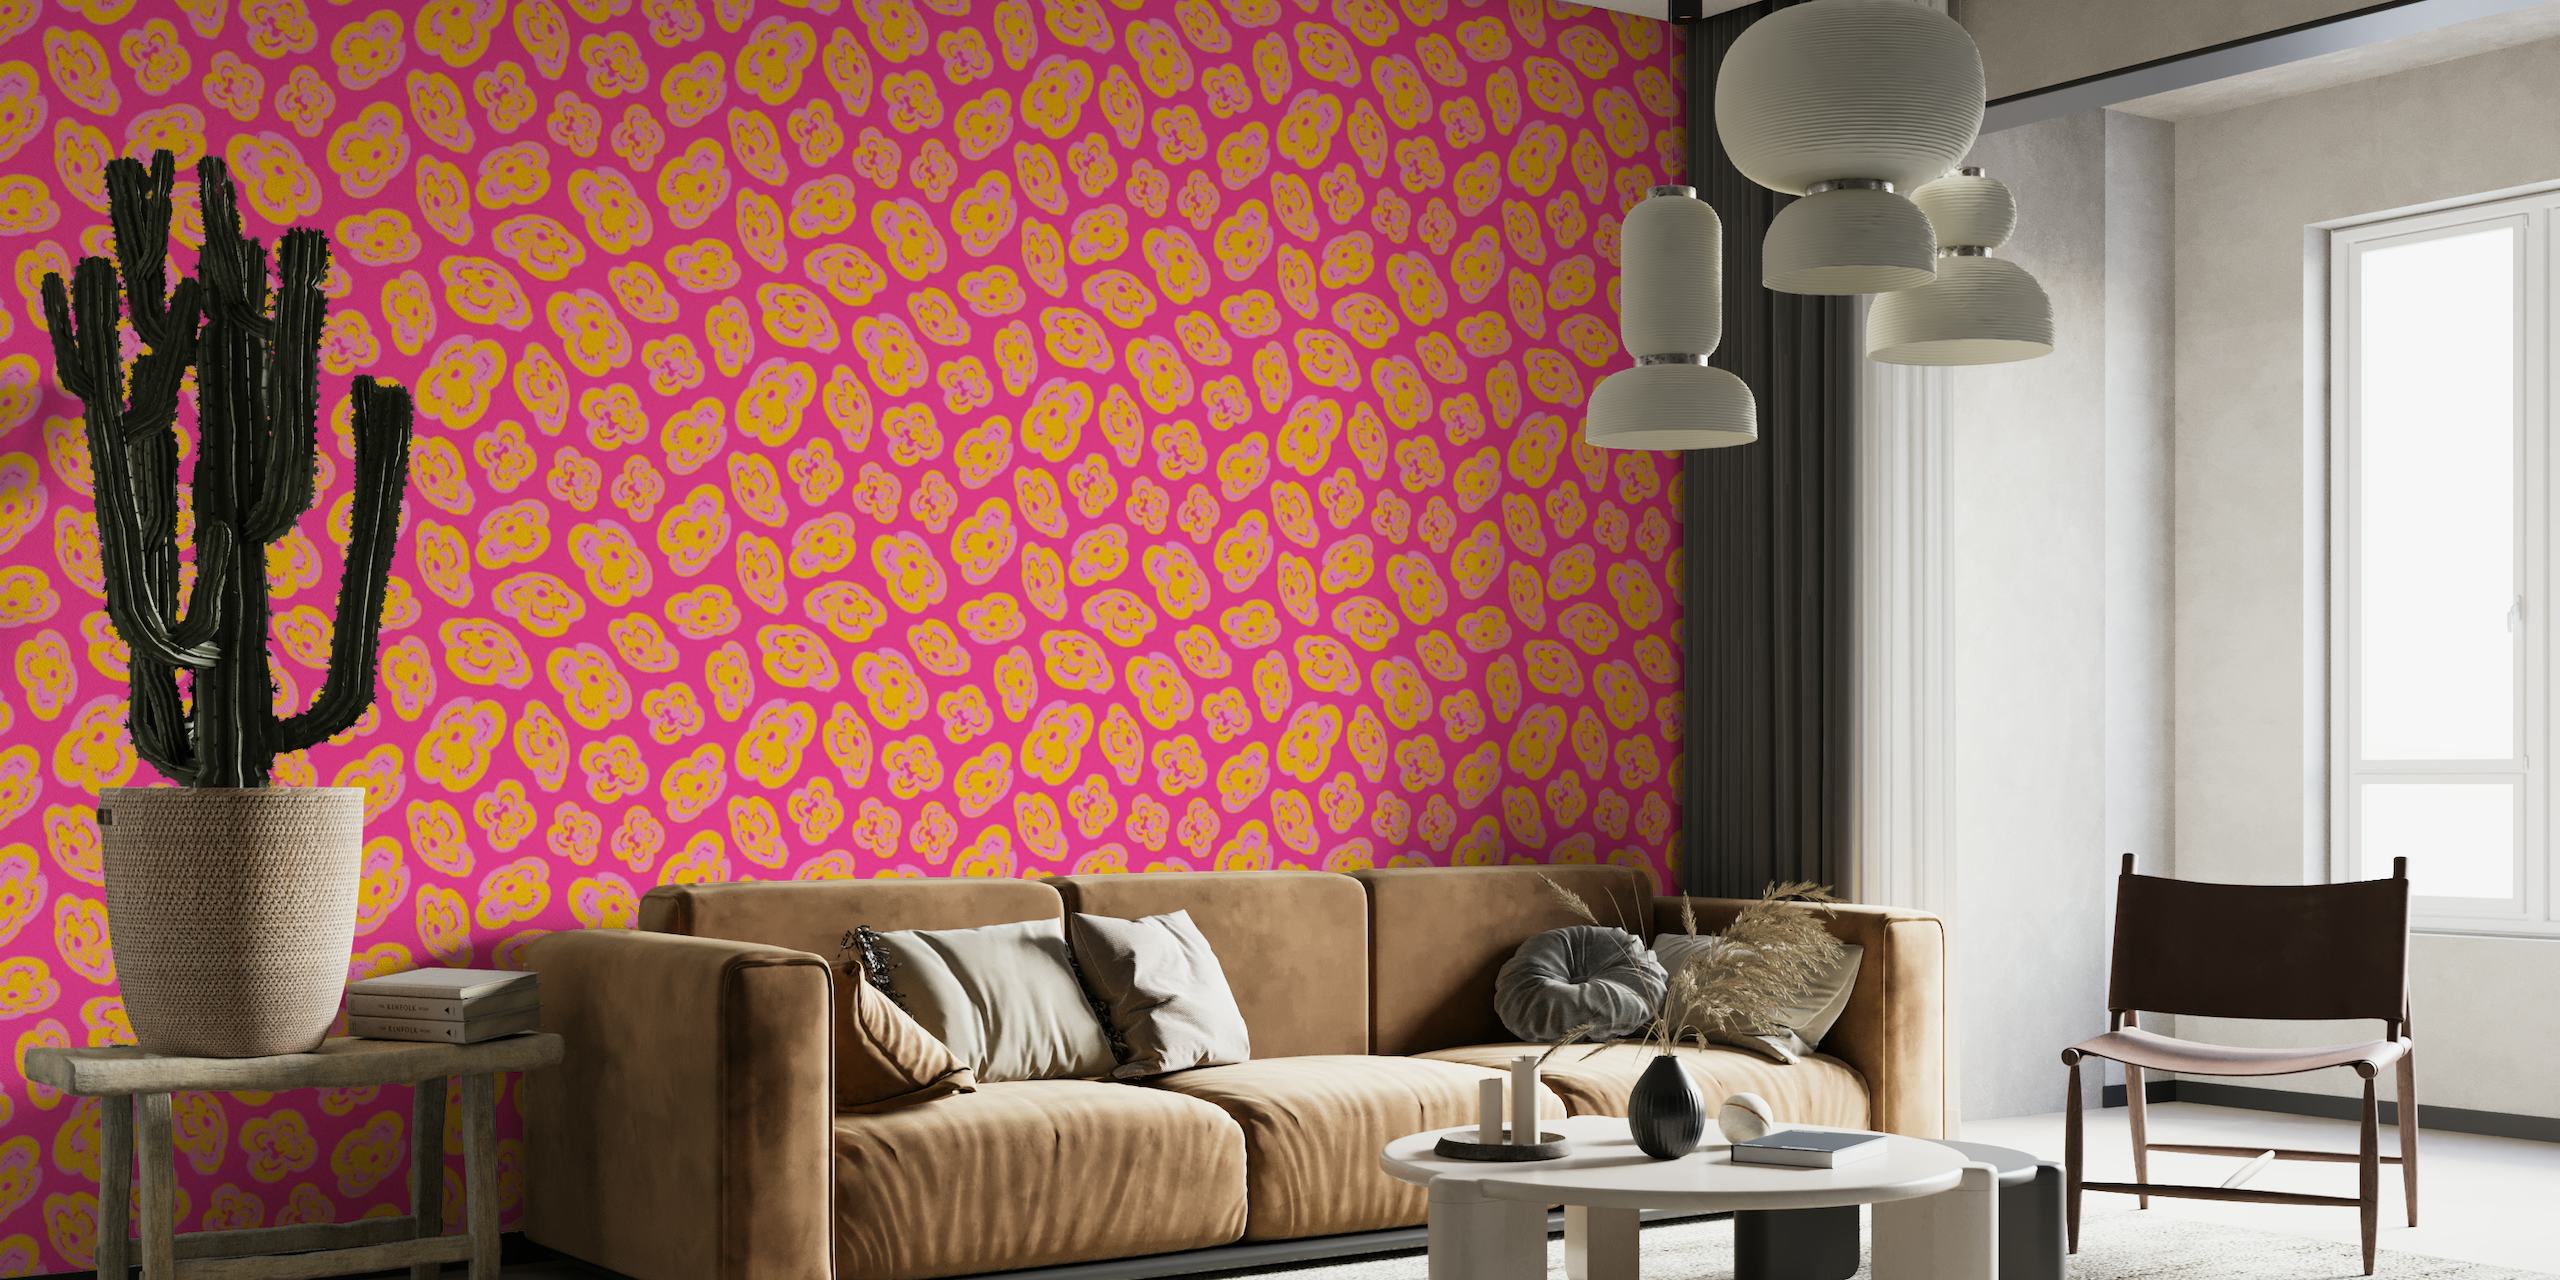 Abstract floating lily patterns in shades of yellow and pink on a fuchsia background wall mural